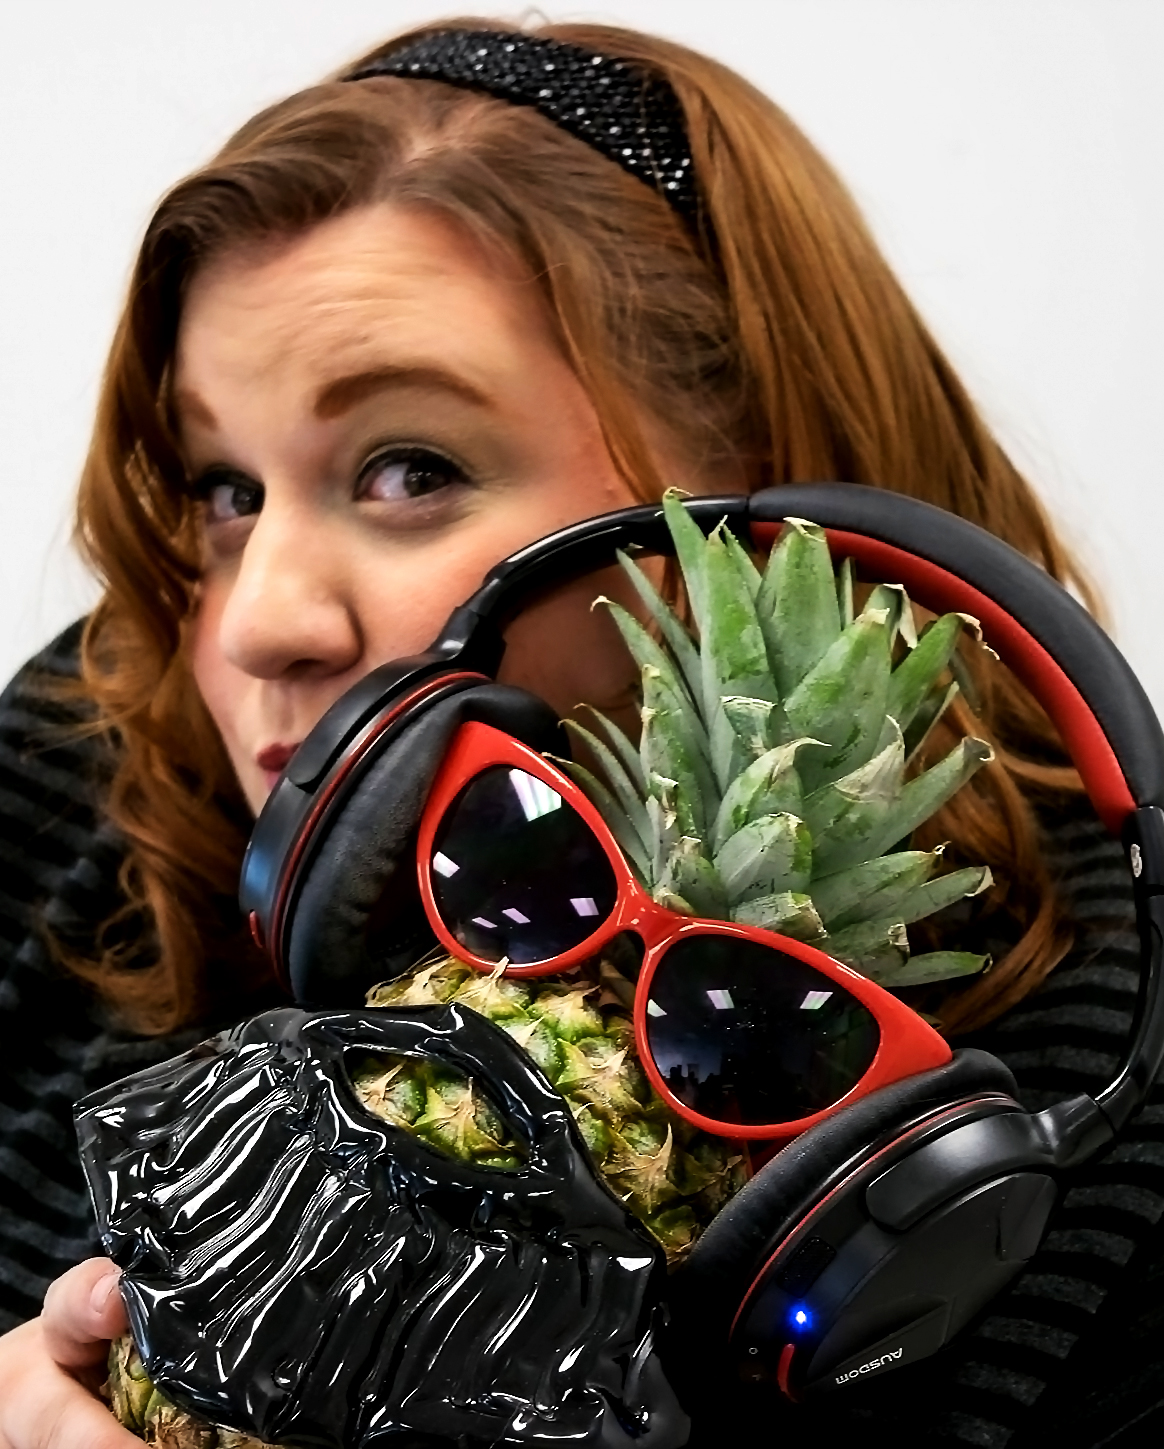 Sarah Gilmour of Sizzle Media with an awesome pineapple